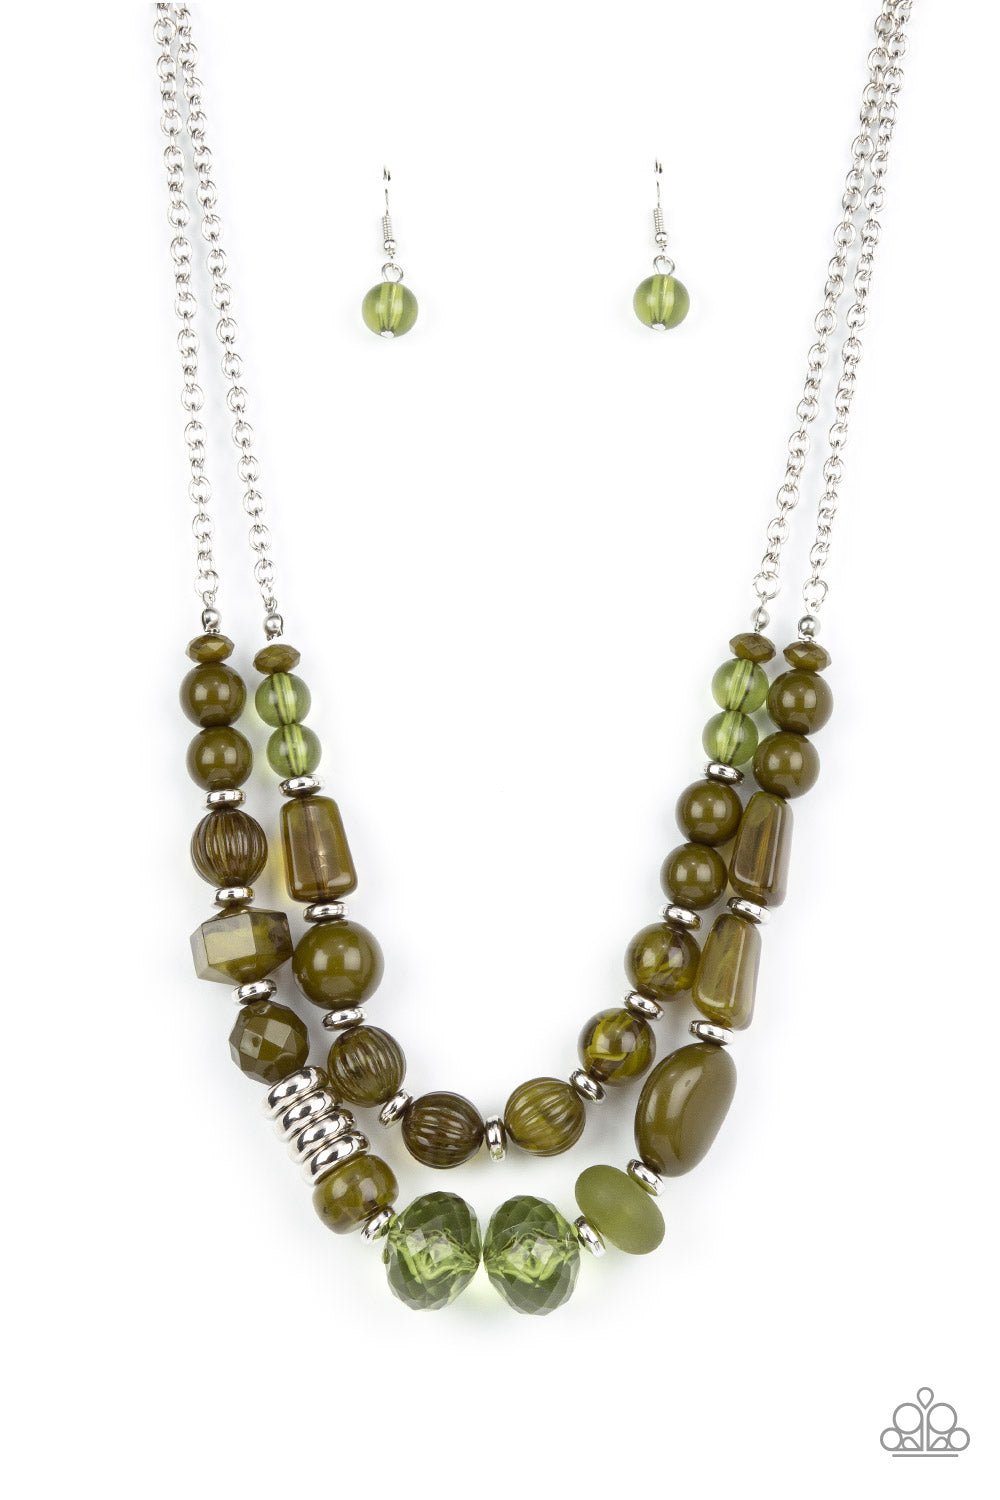 Pina Colada Paradise Green Necklace - Paparazzi Accessories  Varying in shape, size, and opacity, a refreshing collection of Olive Branch acrylic and crystal-like beads join silver discs along invisible wires that flawlessly layer below the collar for an earthy pop of color. Features an adjustable clasp closure.  Sold as one individual necklace. Includes one pair of matching earrings.